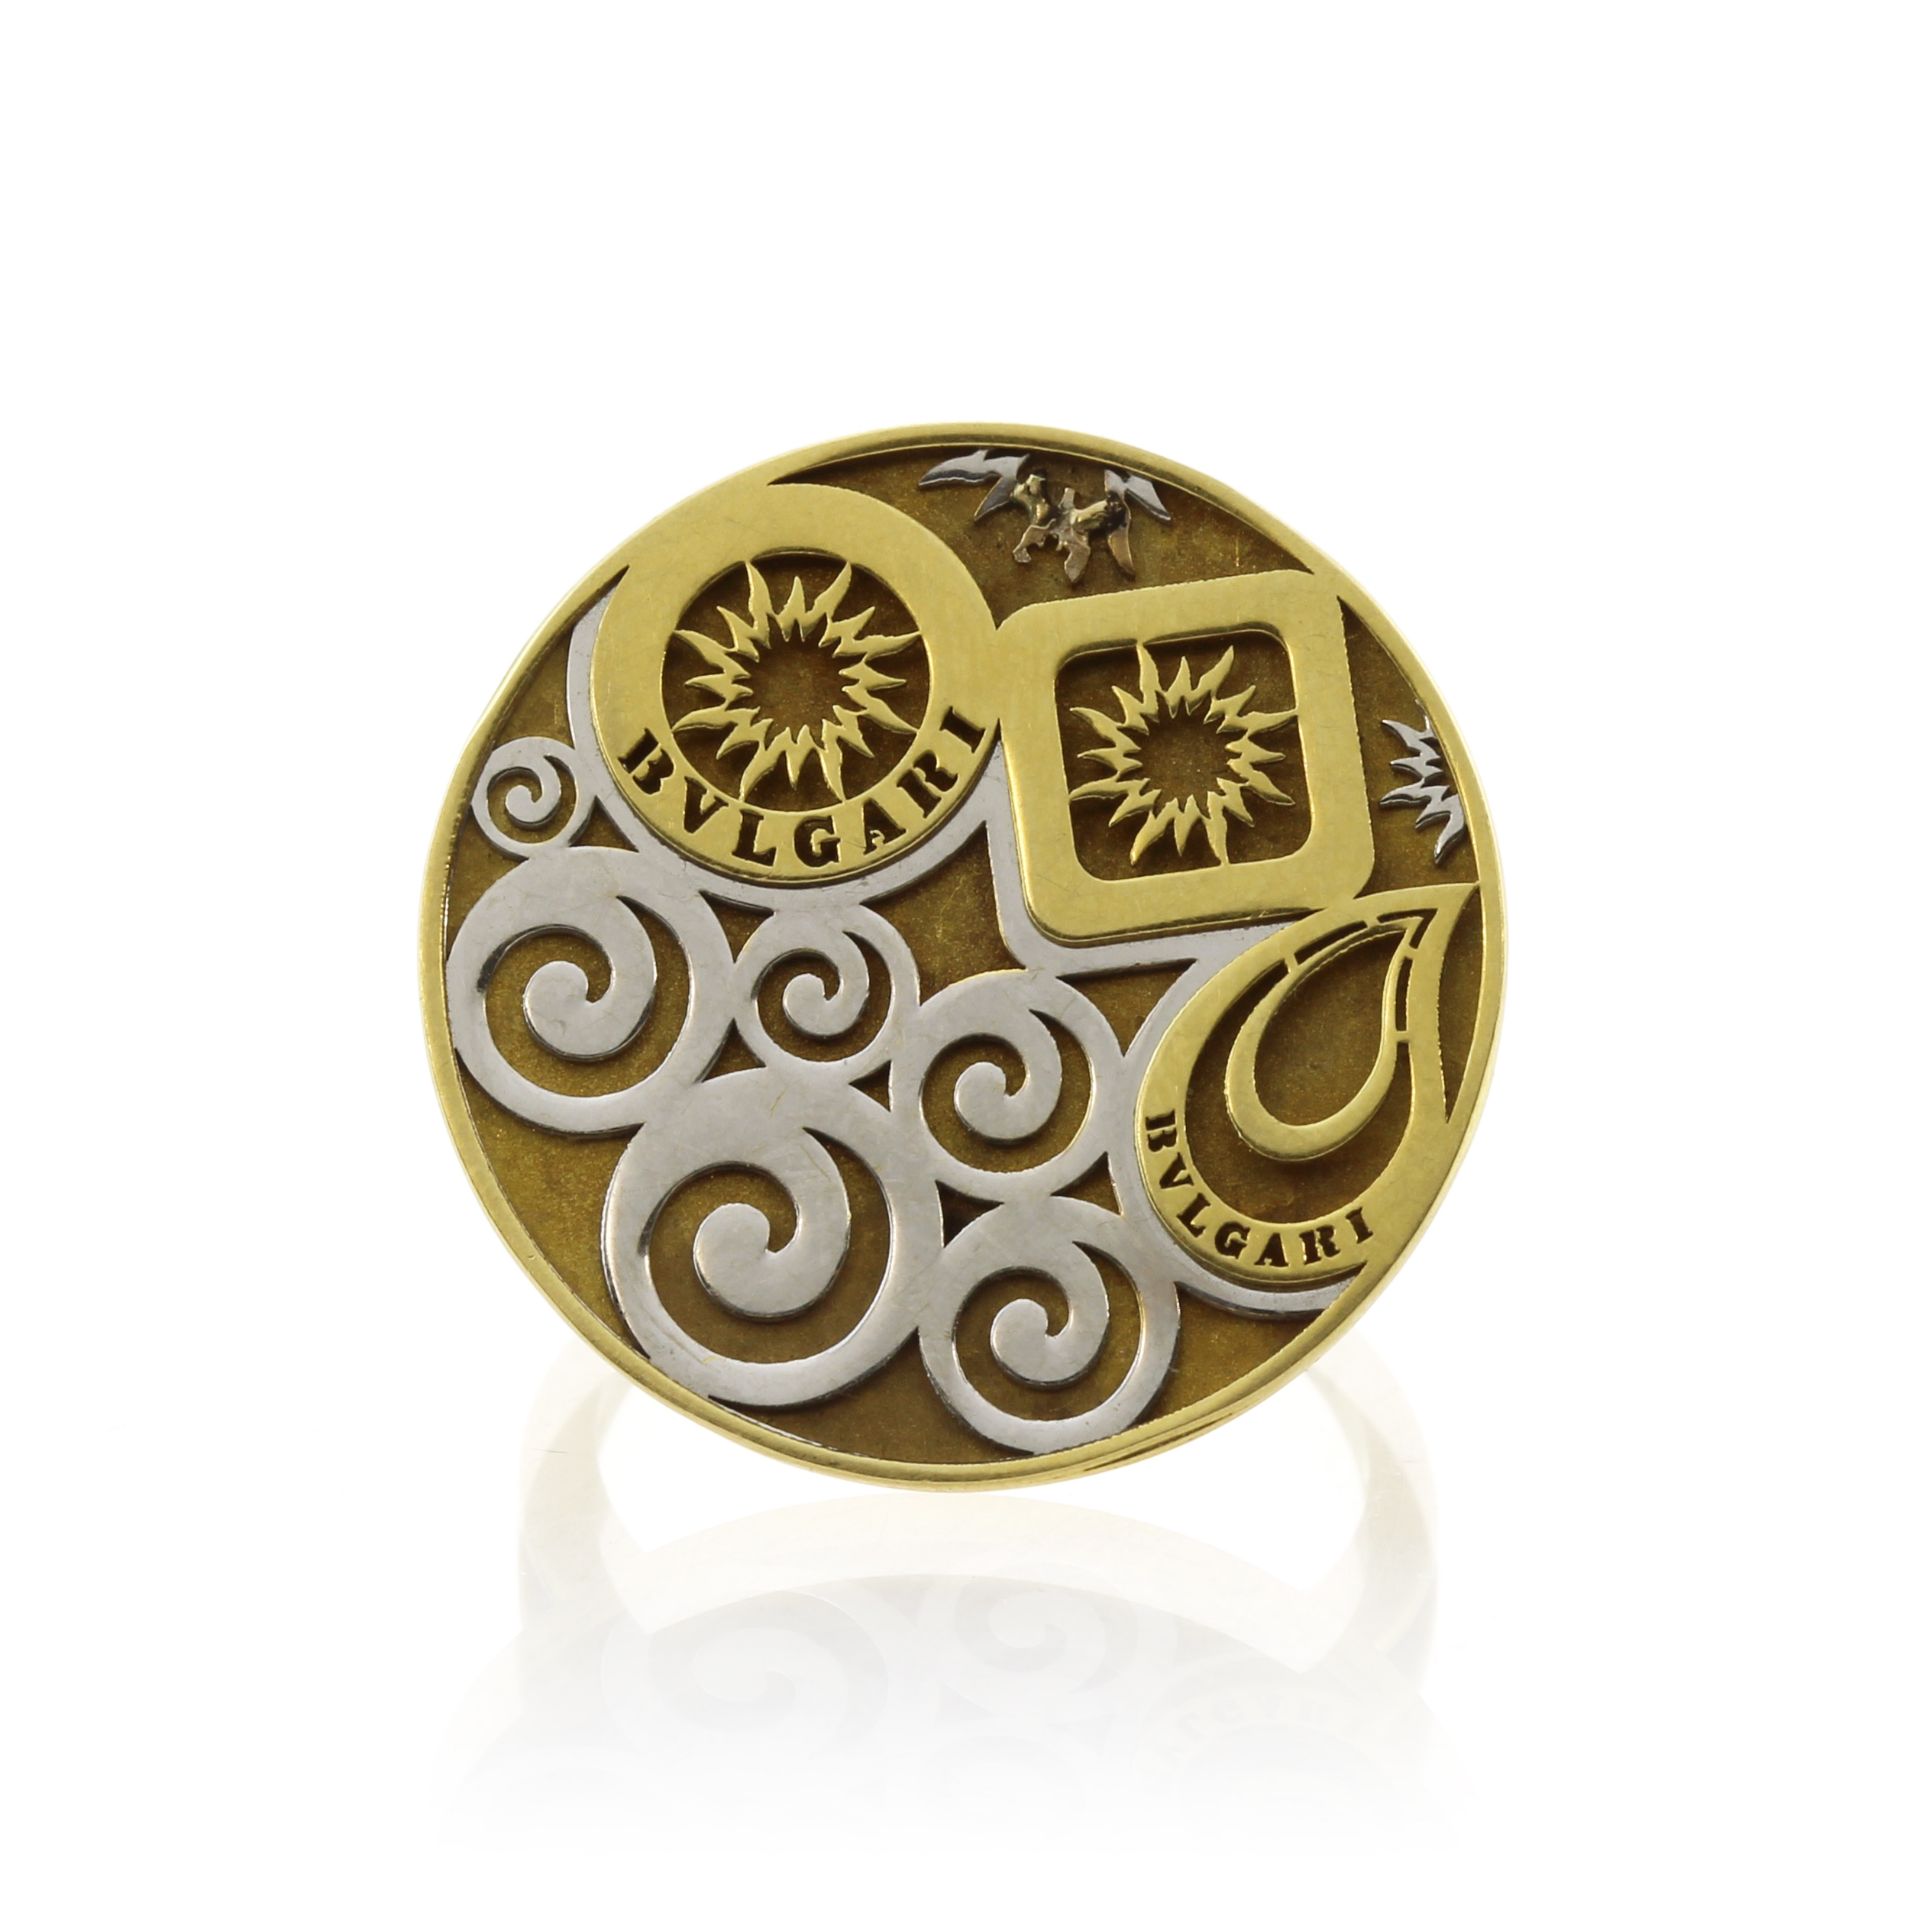 BULGARI A vintage dress ring by Bulgari in 18ct yellow and white gold, the large circular face